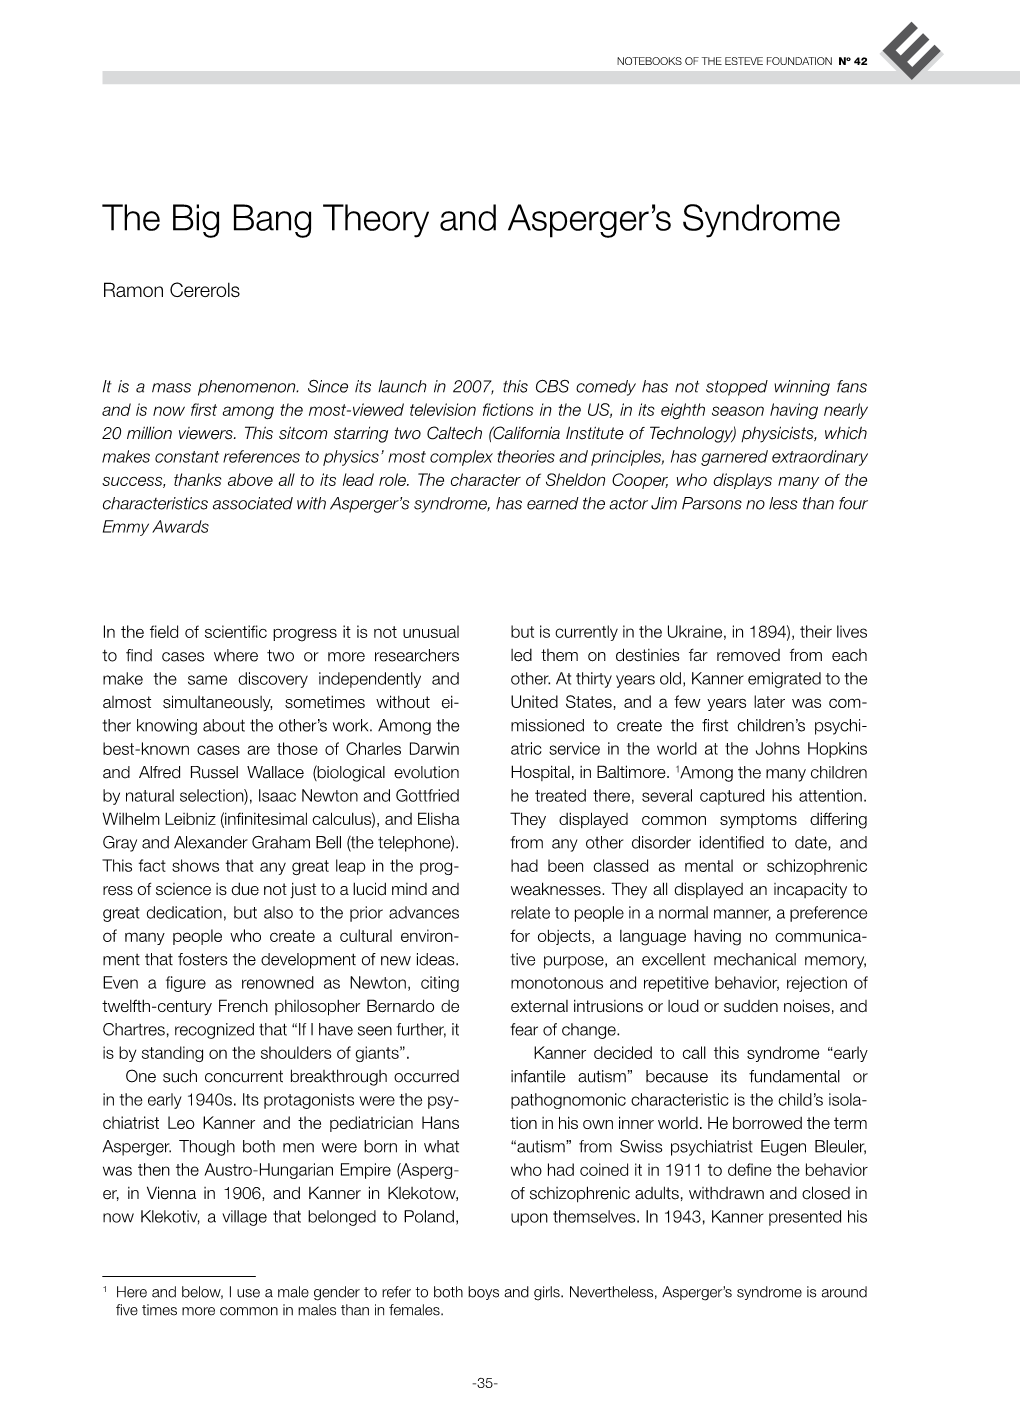 The Big Bang Theory and Asperger's Syndrome